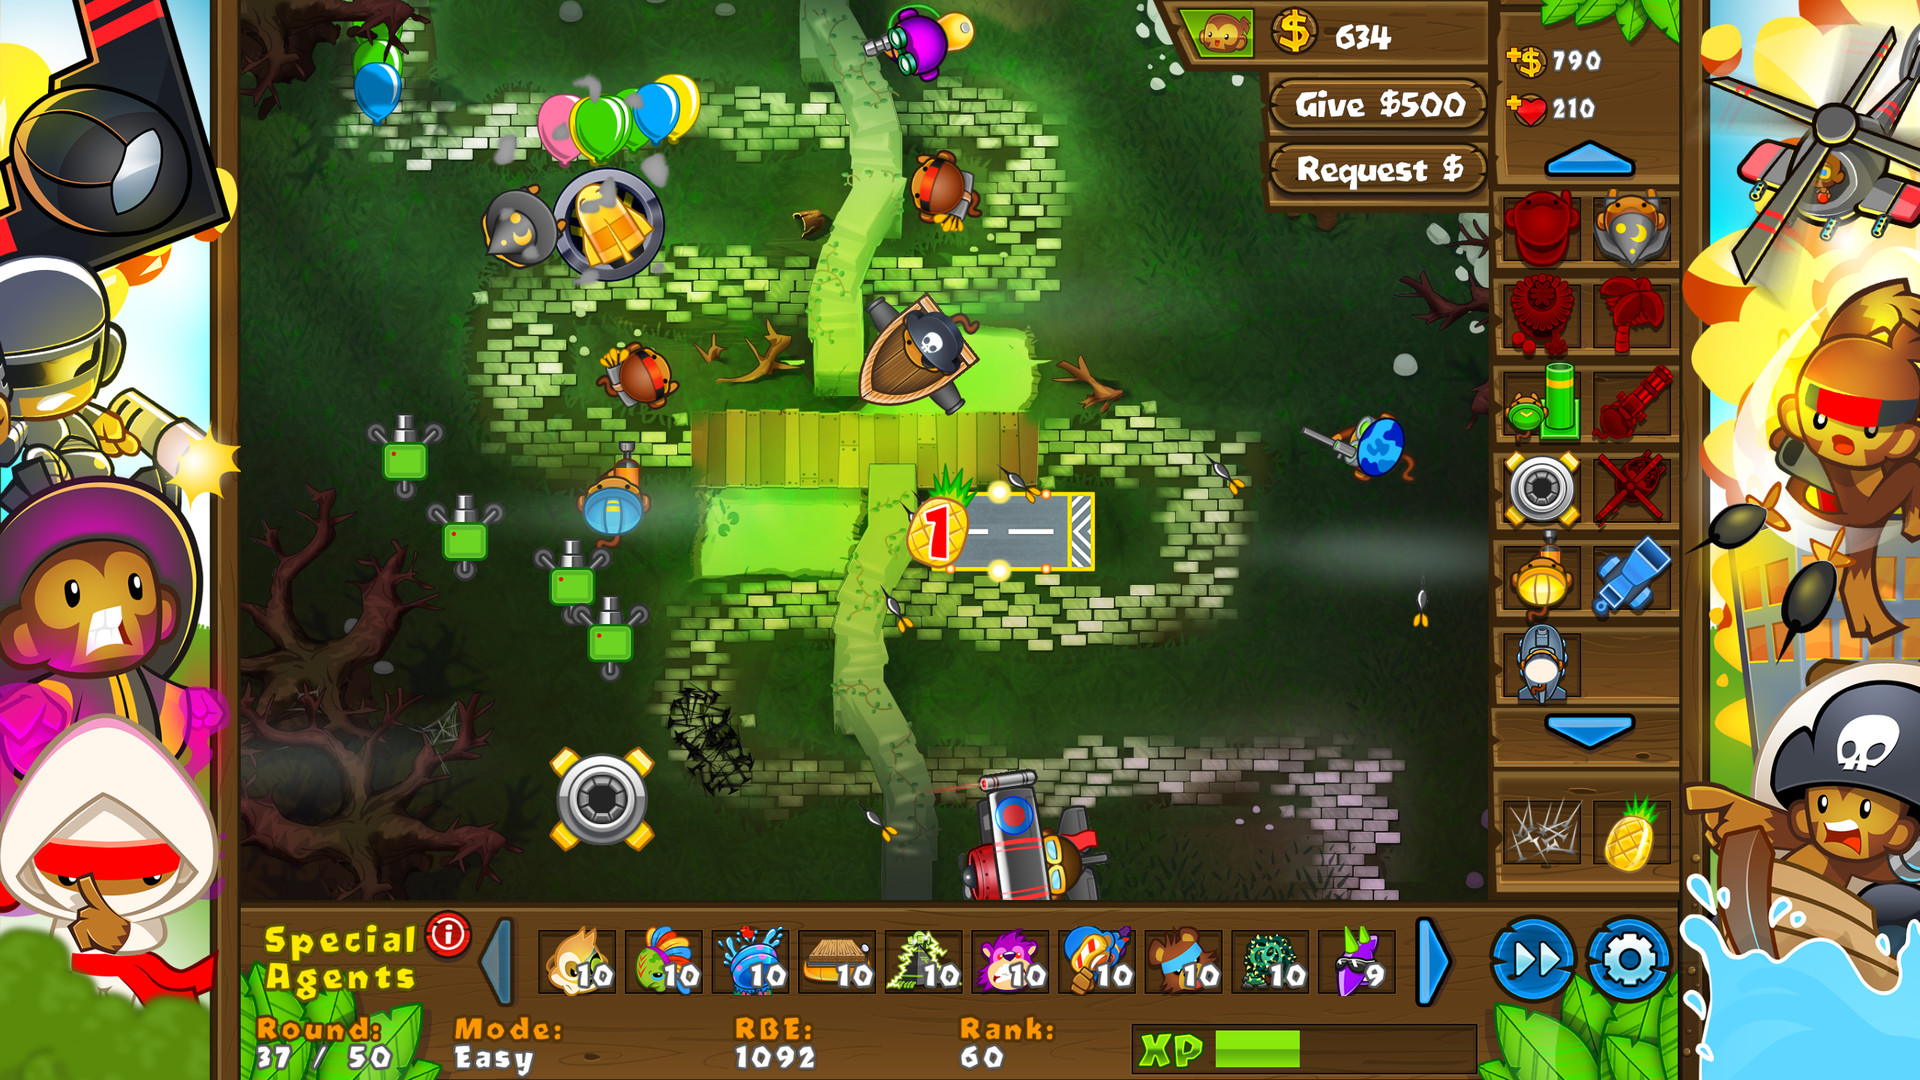 bloons td 5 online free